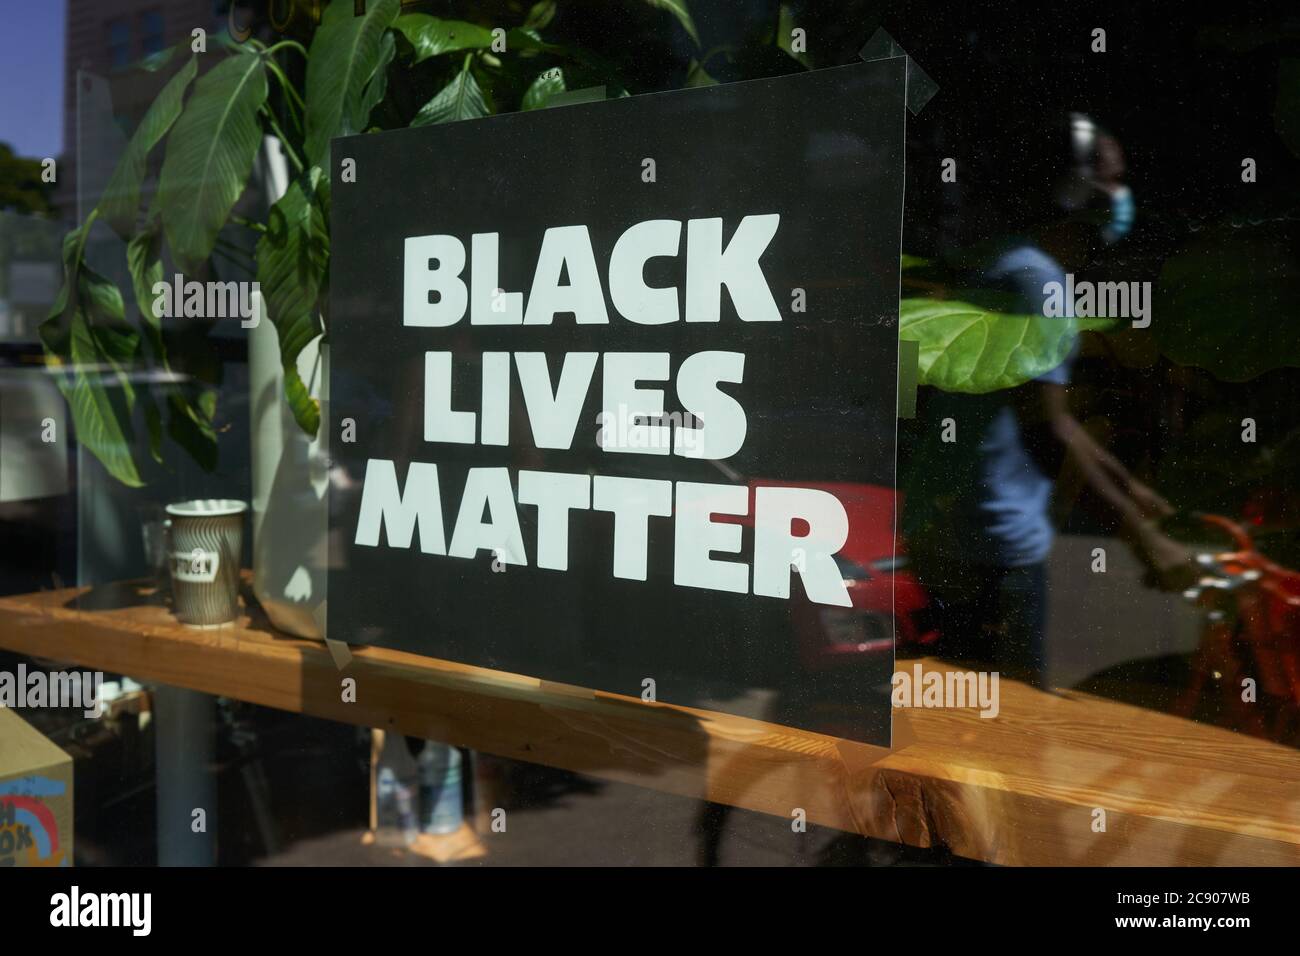 The Black Lives Matter sign is seen on the window at a Stumptown Coffee Roasters location in downtown Portland, Oregon, amid the ongoing BLM movement. Stock Photo